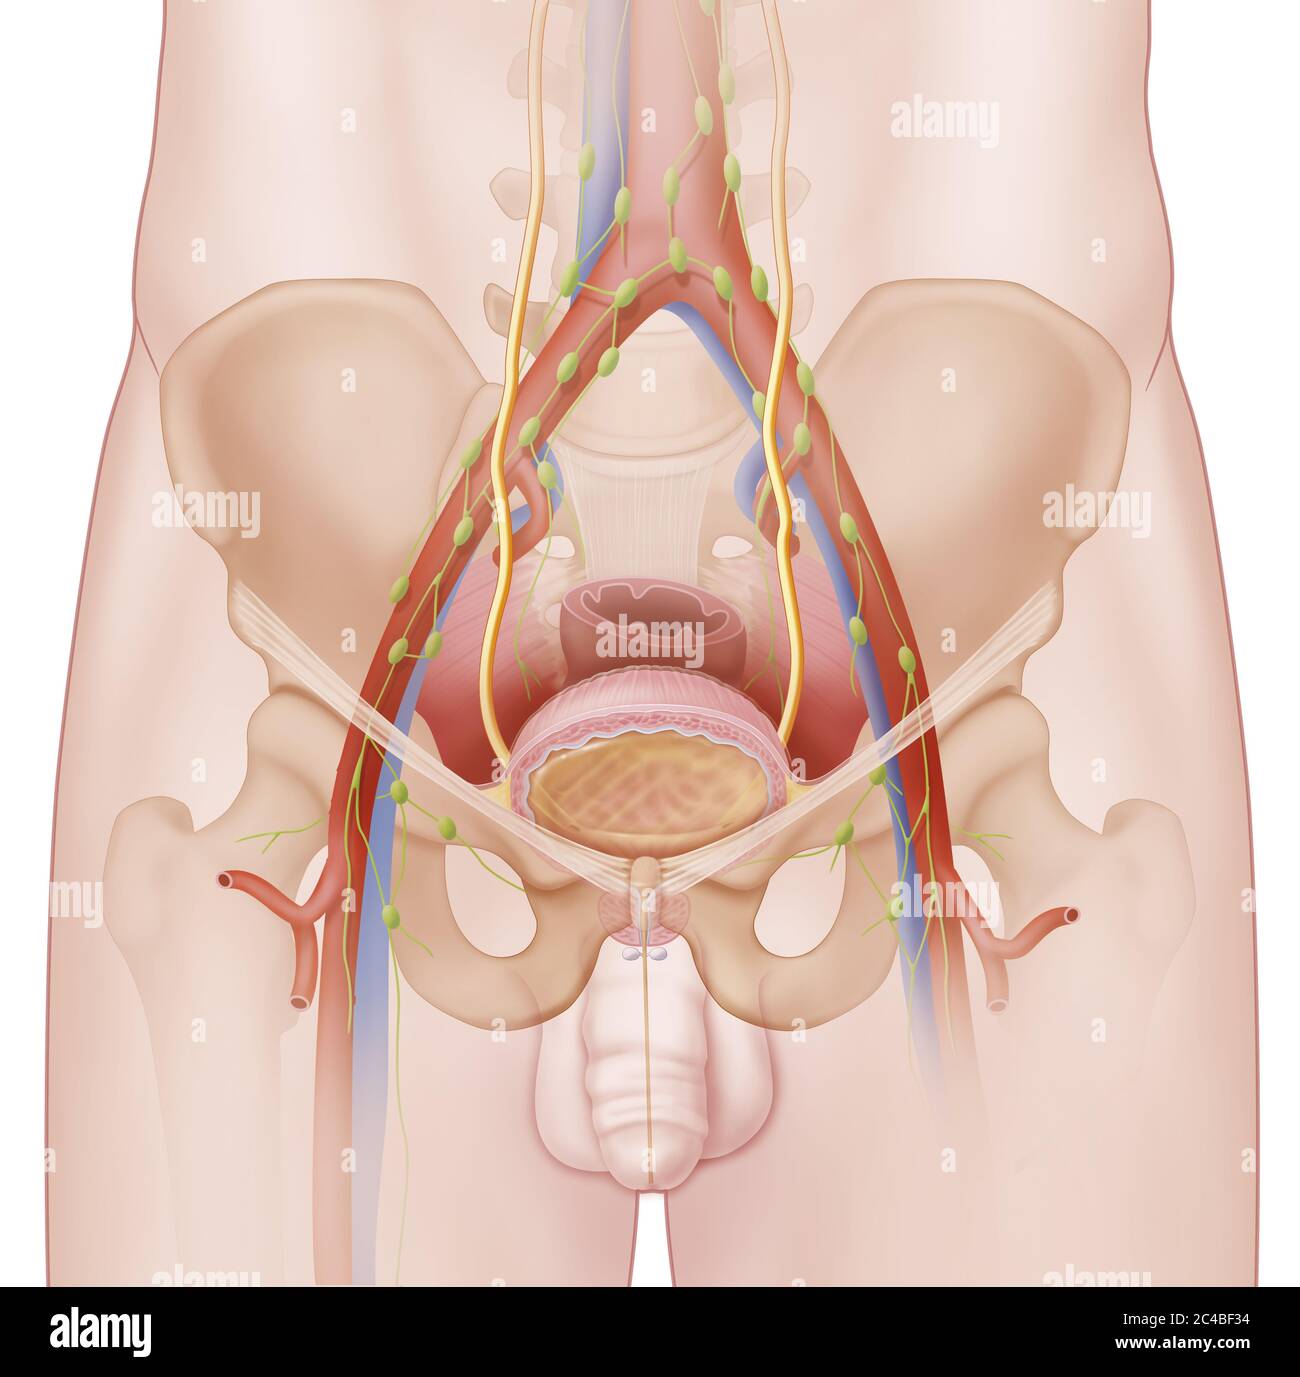 Anatomy of the bladder in humans and its relationships in the pelvic cavity. This medical illustration represents the full bladder and the prostate in Stock Photo